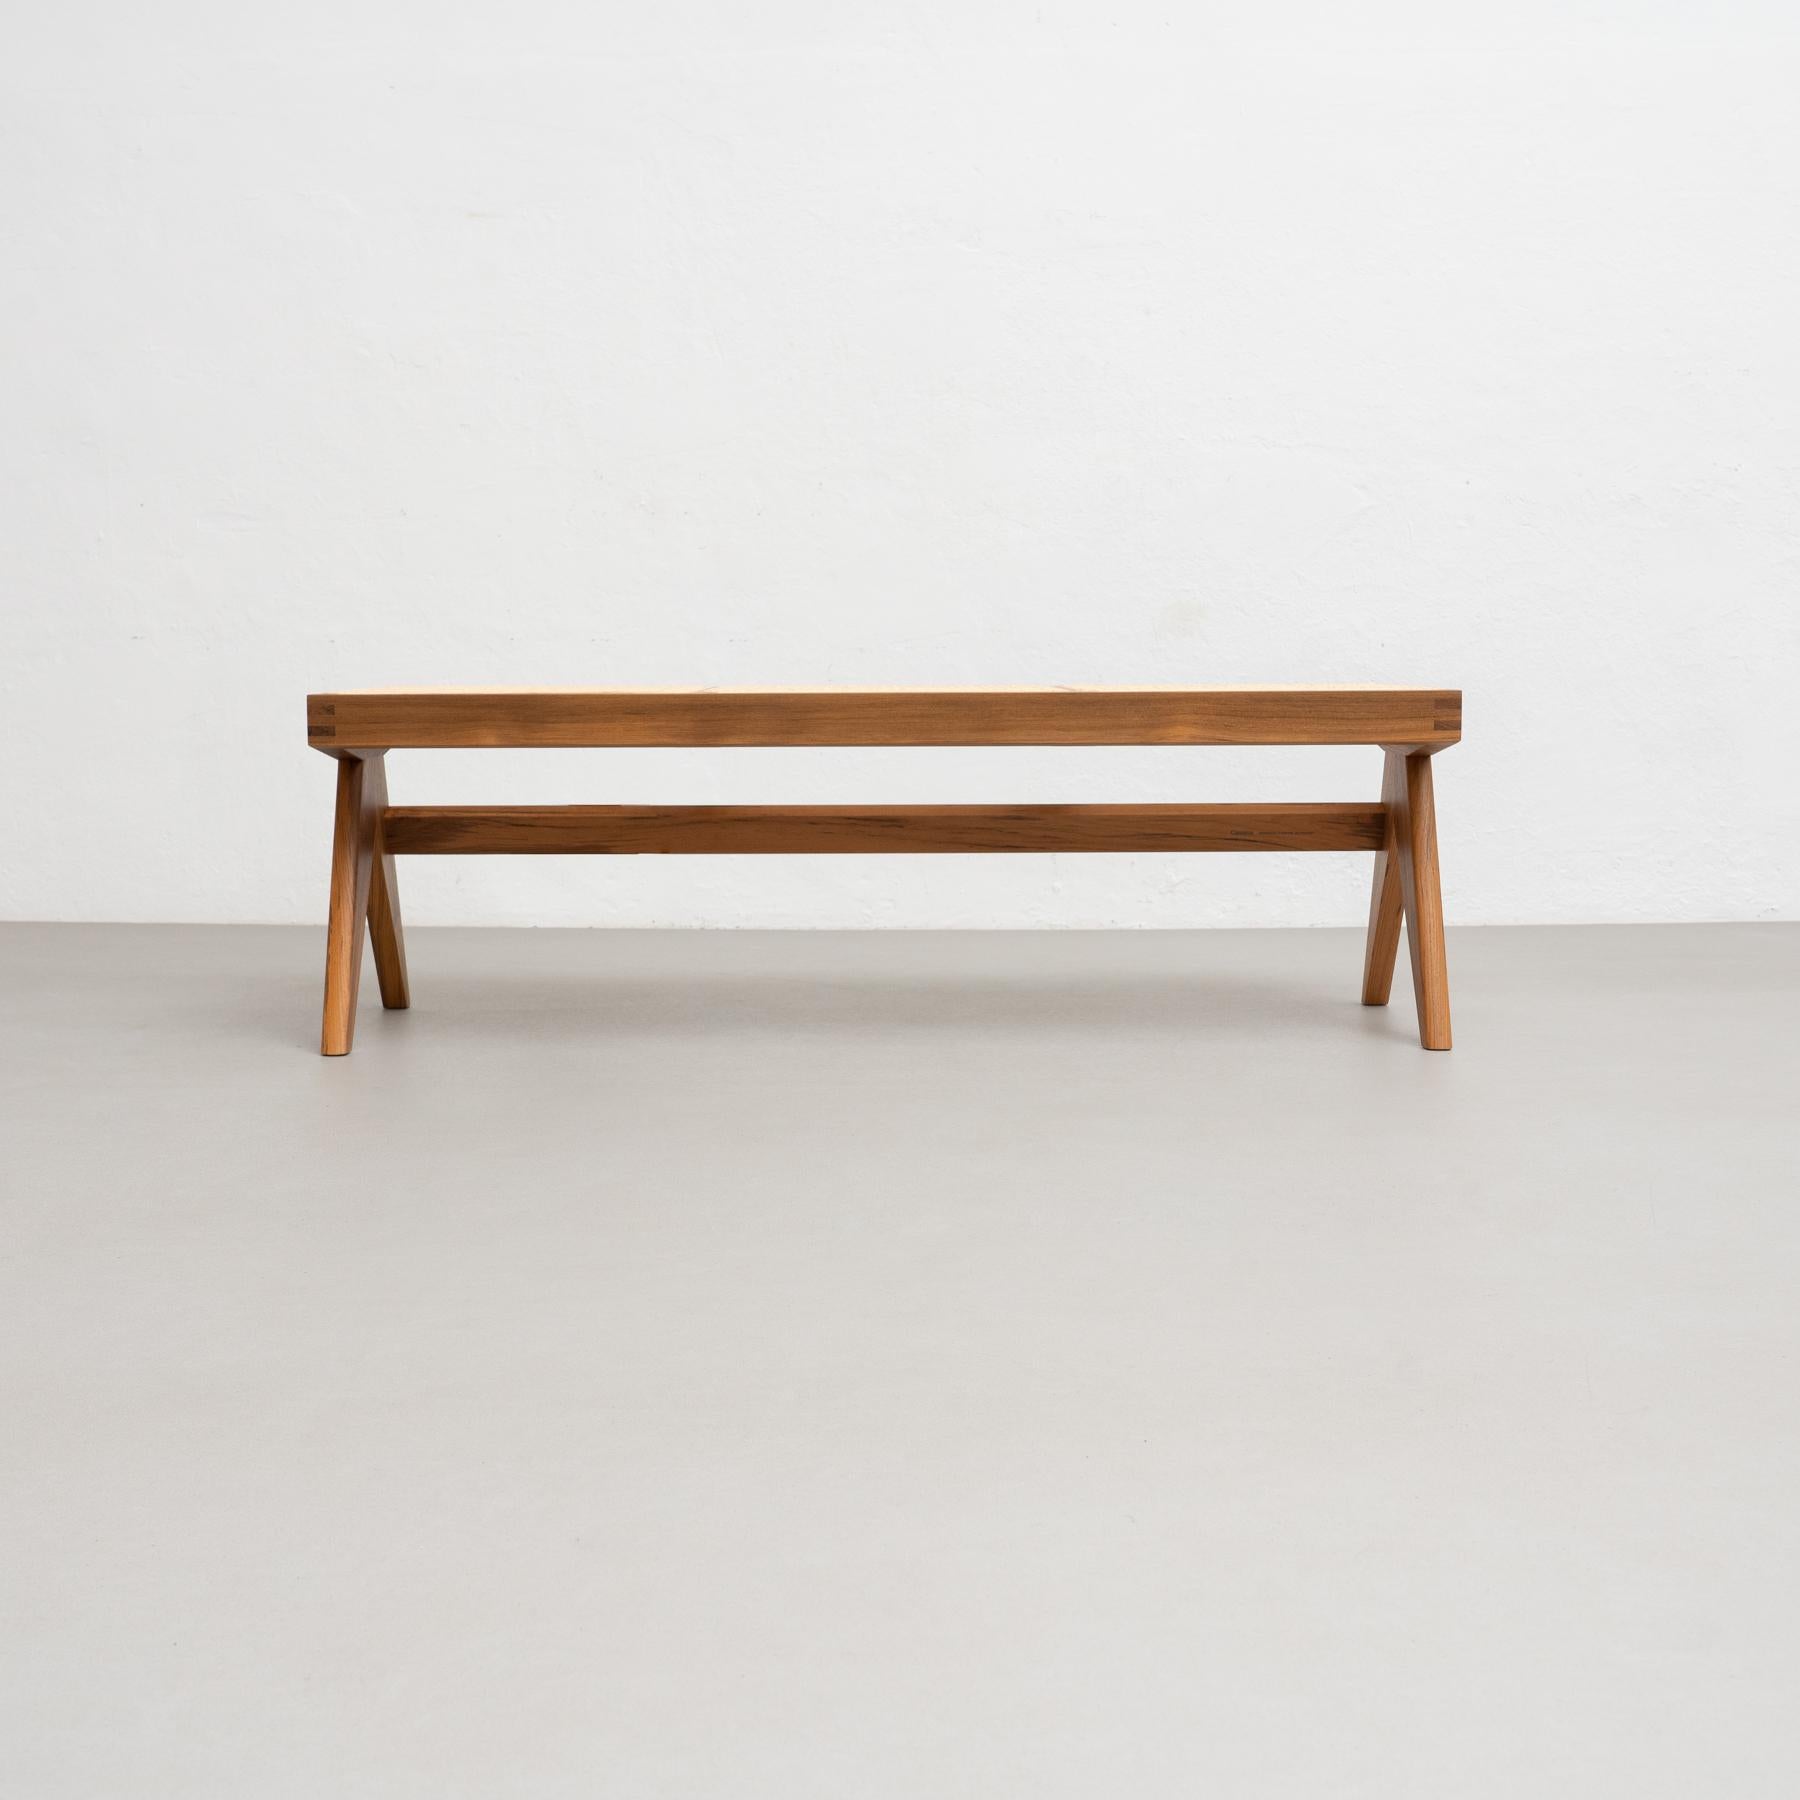 Italian Pierre Jeanneret 057 Civil Bench, Wood and Woven Viennese Cane by Cassina